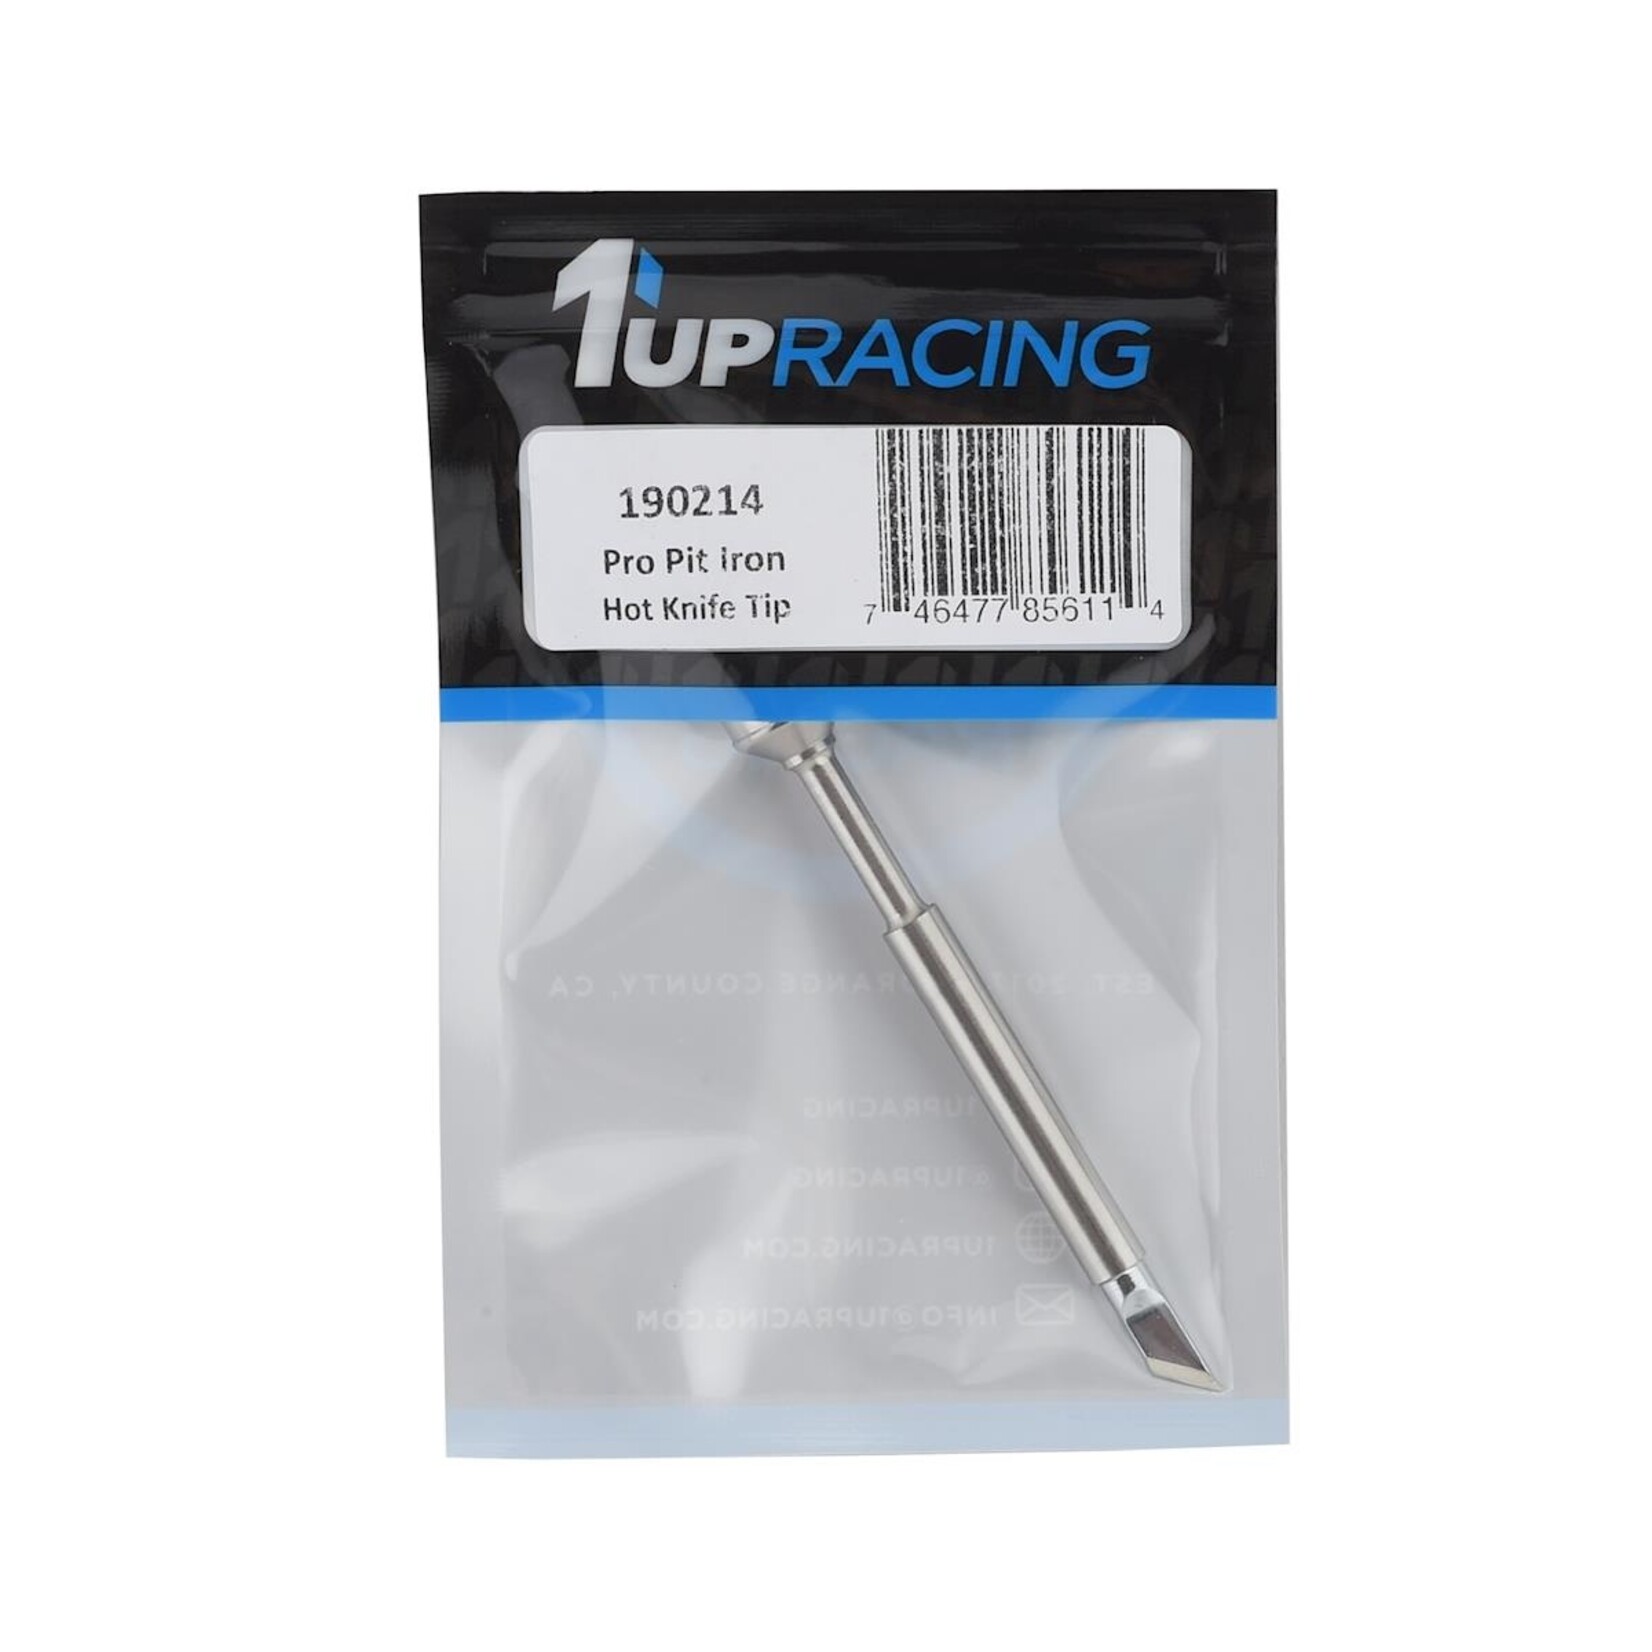 1UP Racing 1UP Racing TS100 Pro Pit Hot Knife Soldering Iron Tip #190214